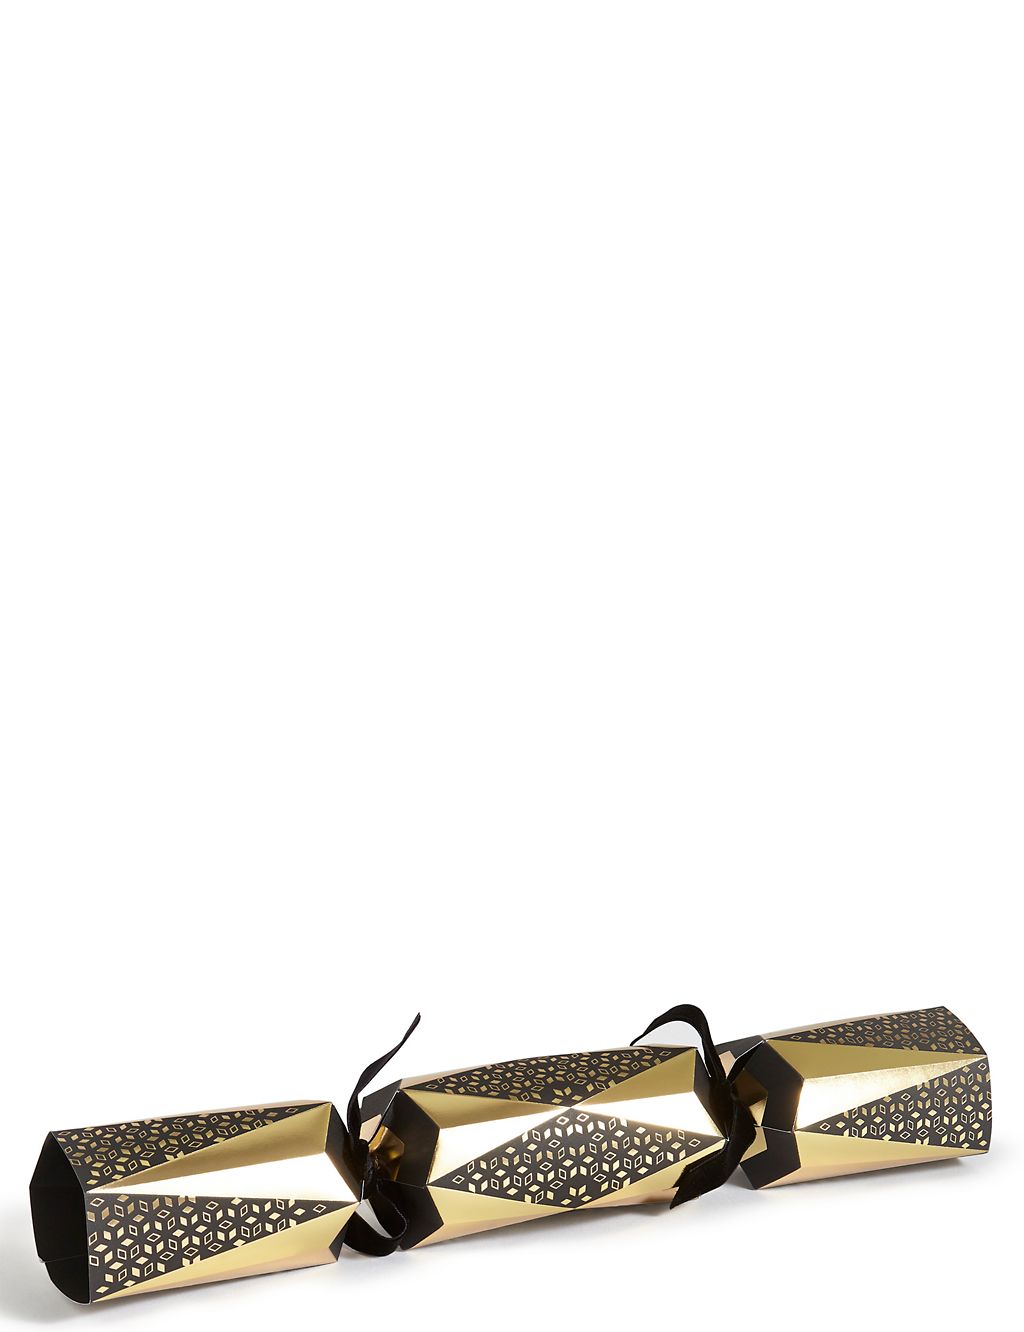 Luxury Gold & Black Christmas Crackers Pack of 8 2 of 4